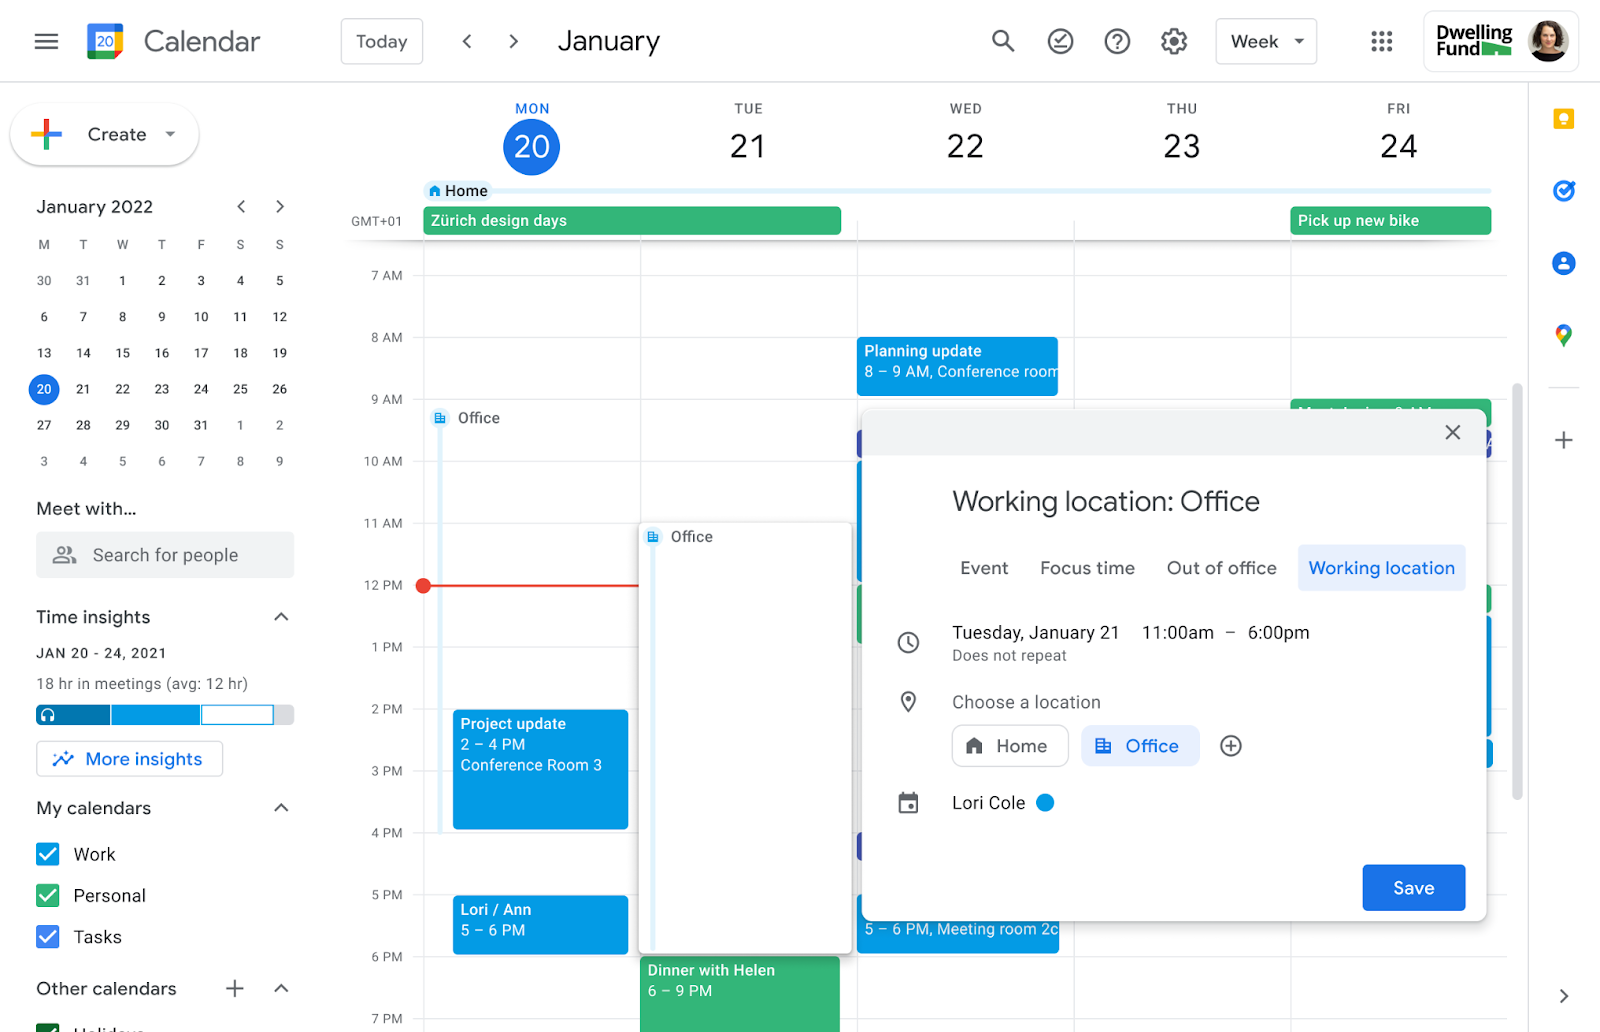 Google Calendar now lets users specify where they’re working from throughout the day